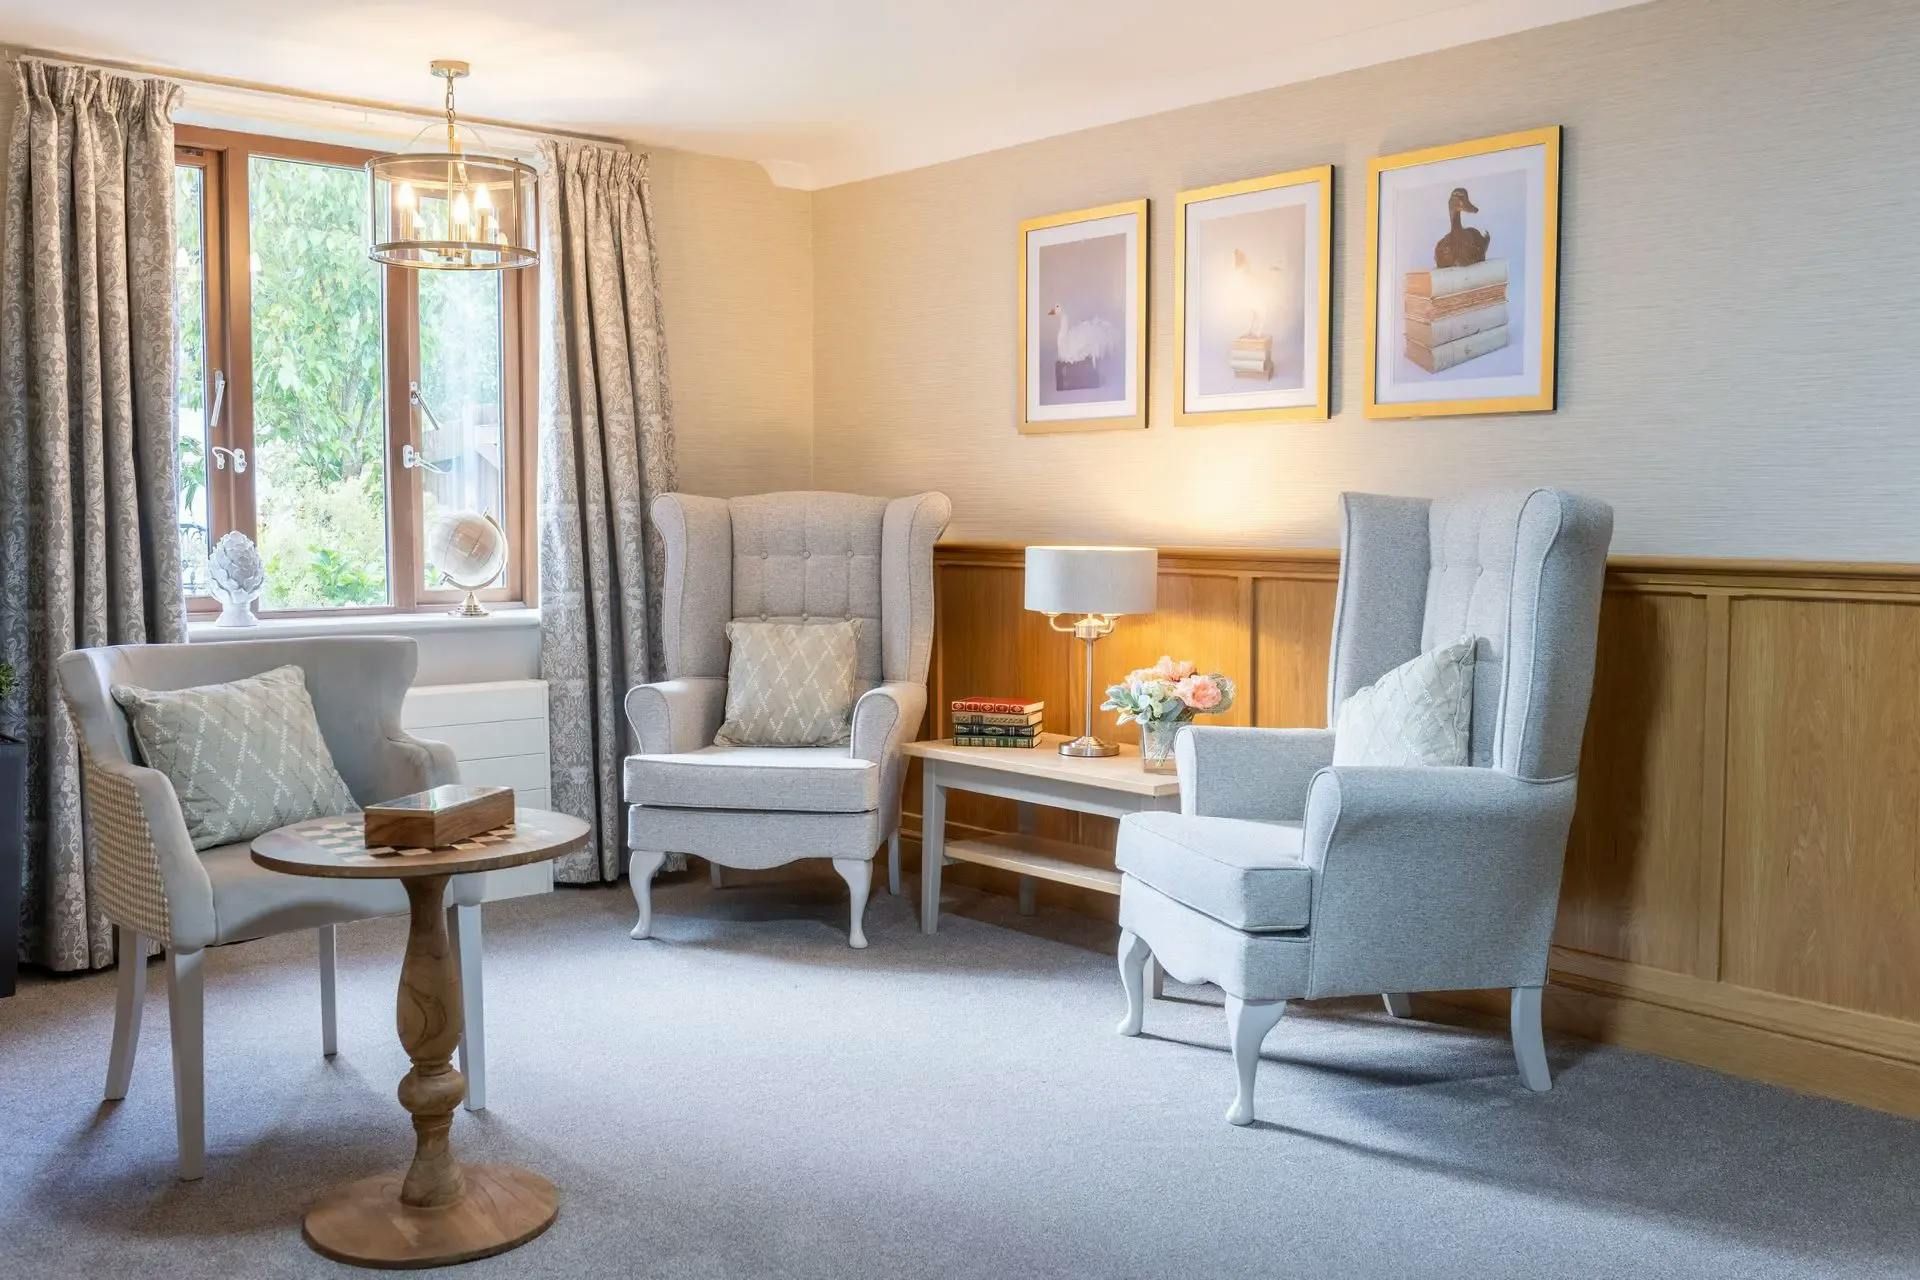 Bedroom at Abbeycrest Care Home in Reading, Berkshire